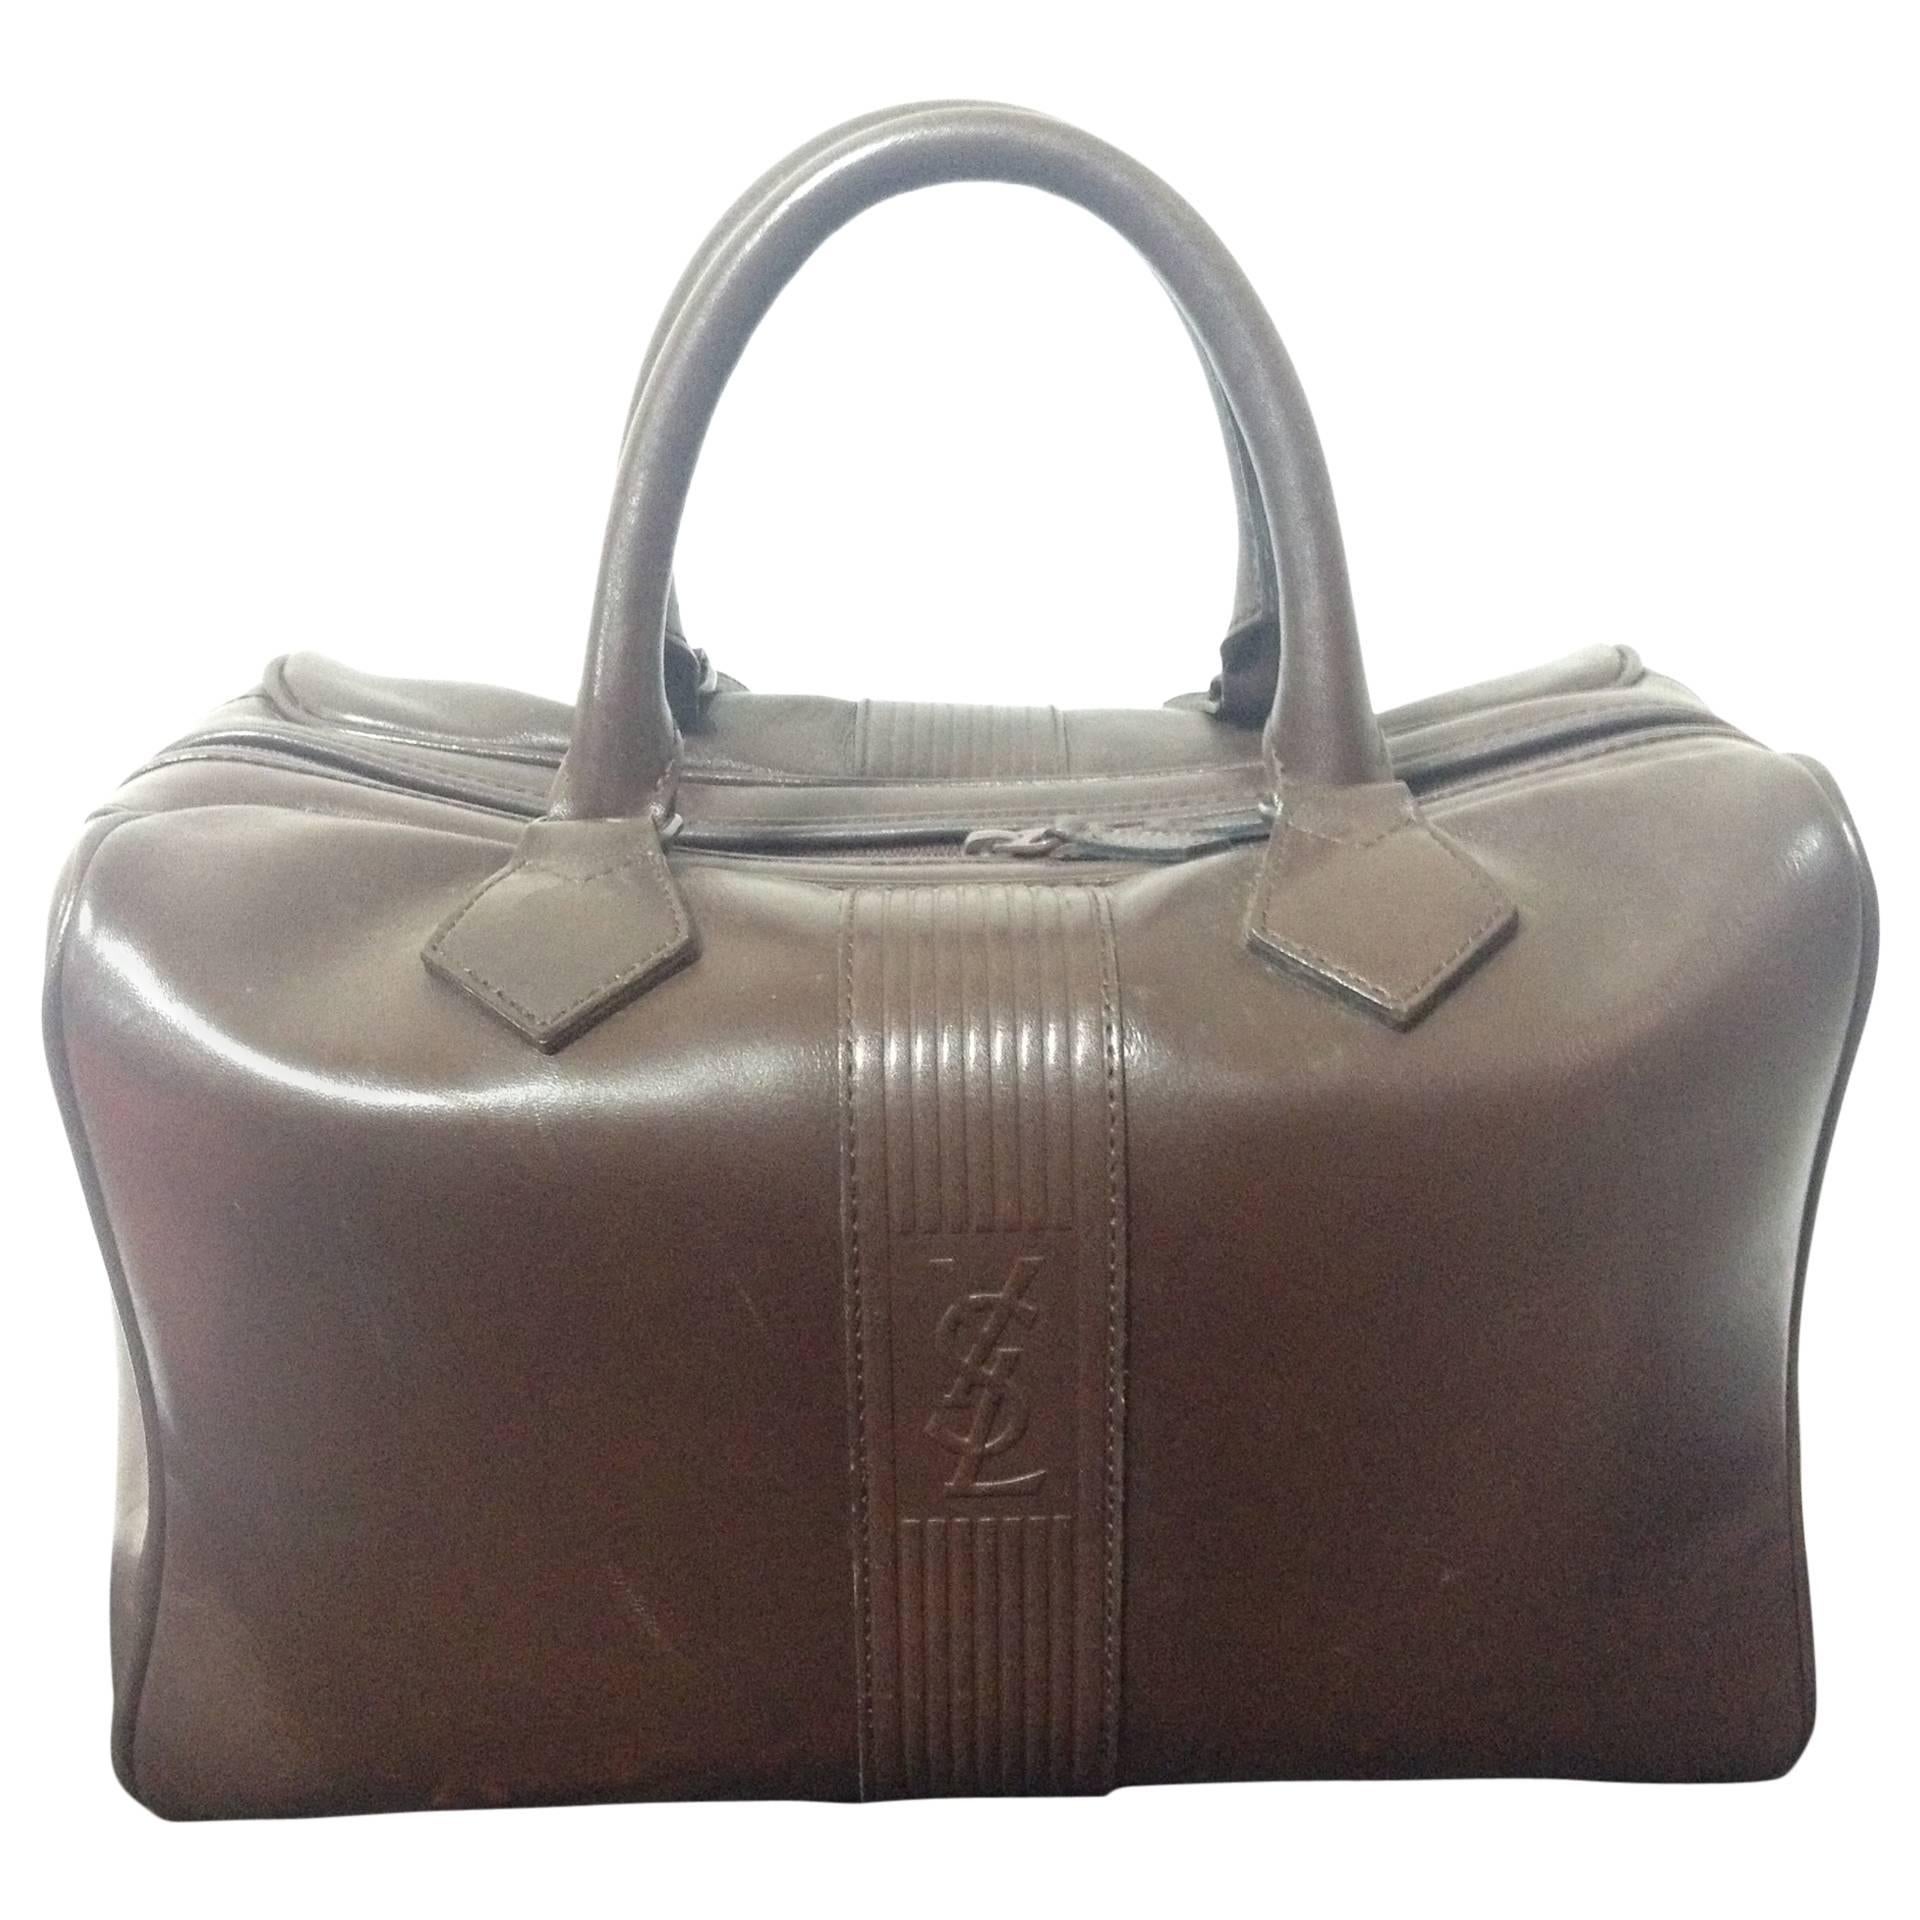 Vintage Yves Saint Laurent genuine dark brown leather daily use duffle bag. Clas For Sale